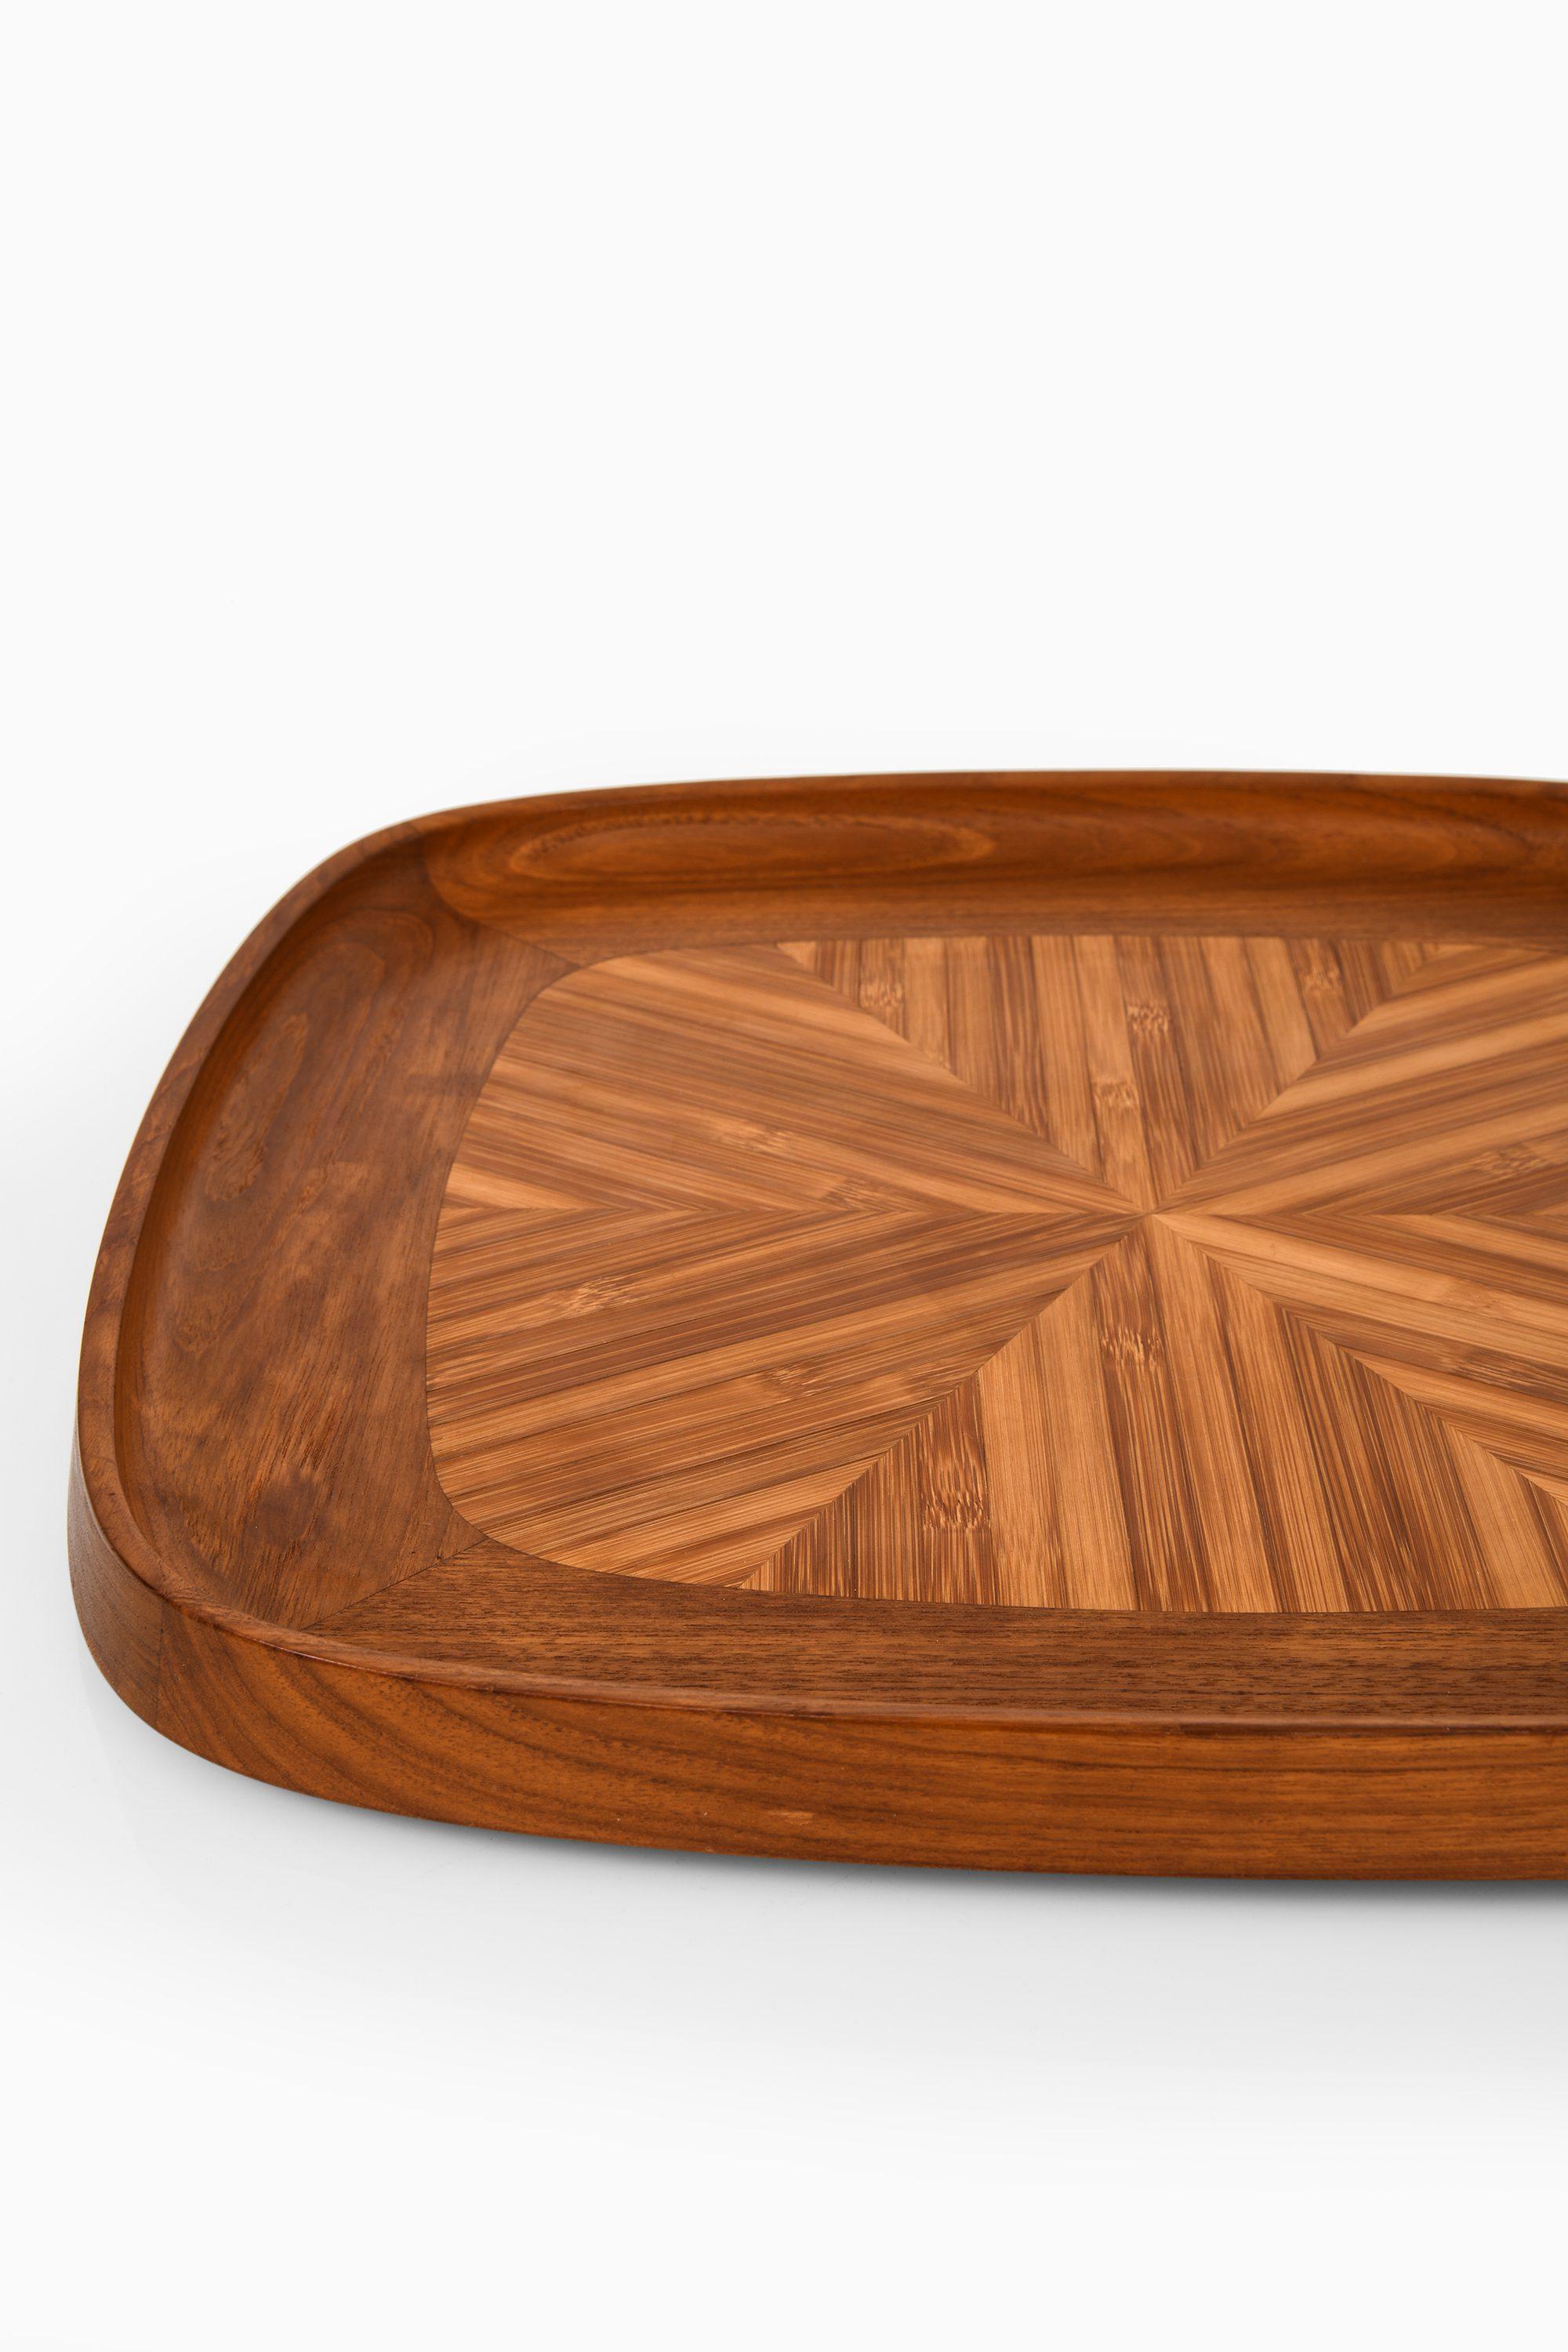 Danish Serving Tray in Teak and Bamboo by Jens Quistgaard, 1950's For Sale